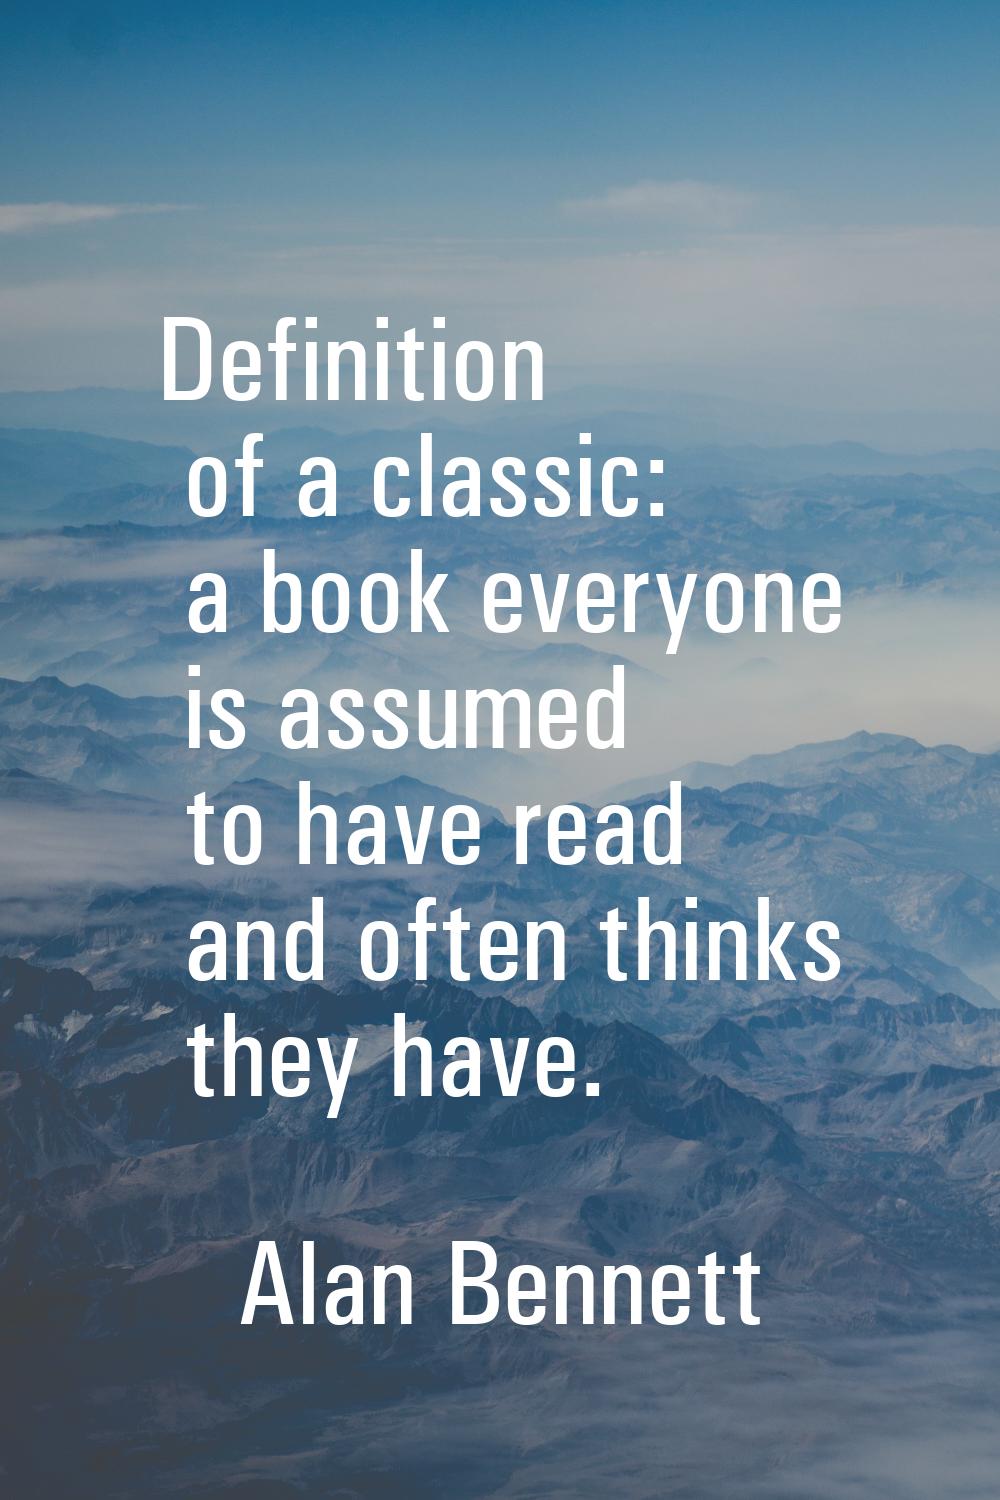 Definition of a classic: a book everyone is assumed to have read and often thinks they have.